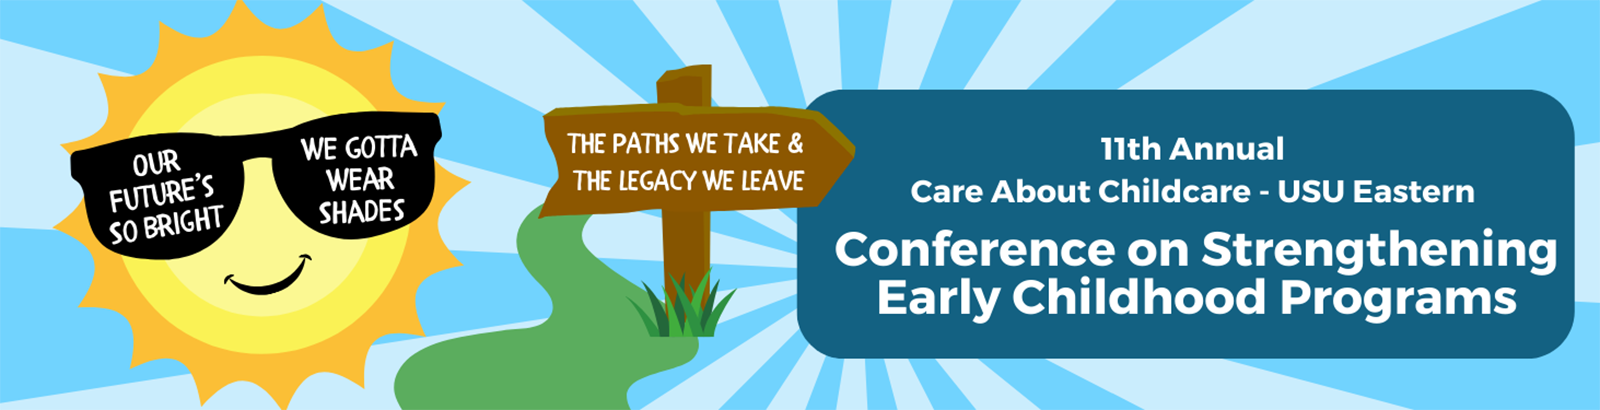 11th Annual Care About Childcare - USU Eastern Conference on Strengthening Early Childhood Programs